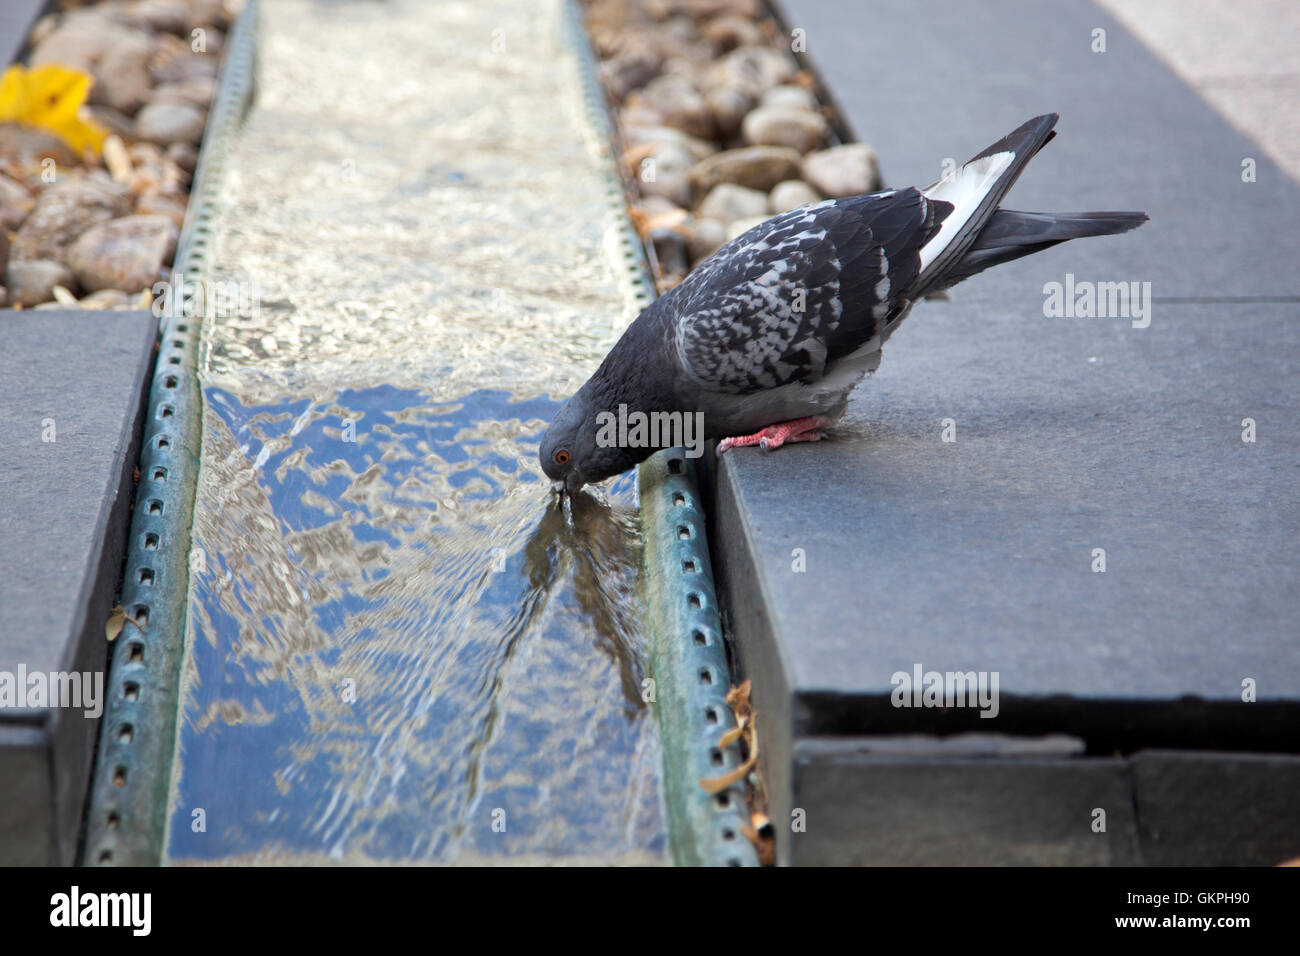 Pigeon drinking water from a fountain (Canary Wharf, London, UK) Stock Photo